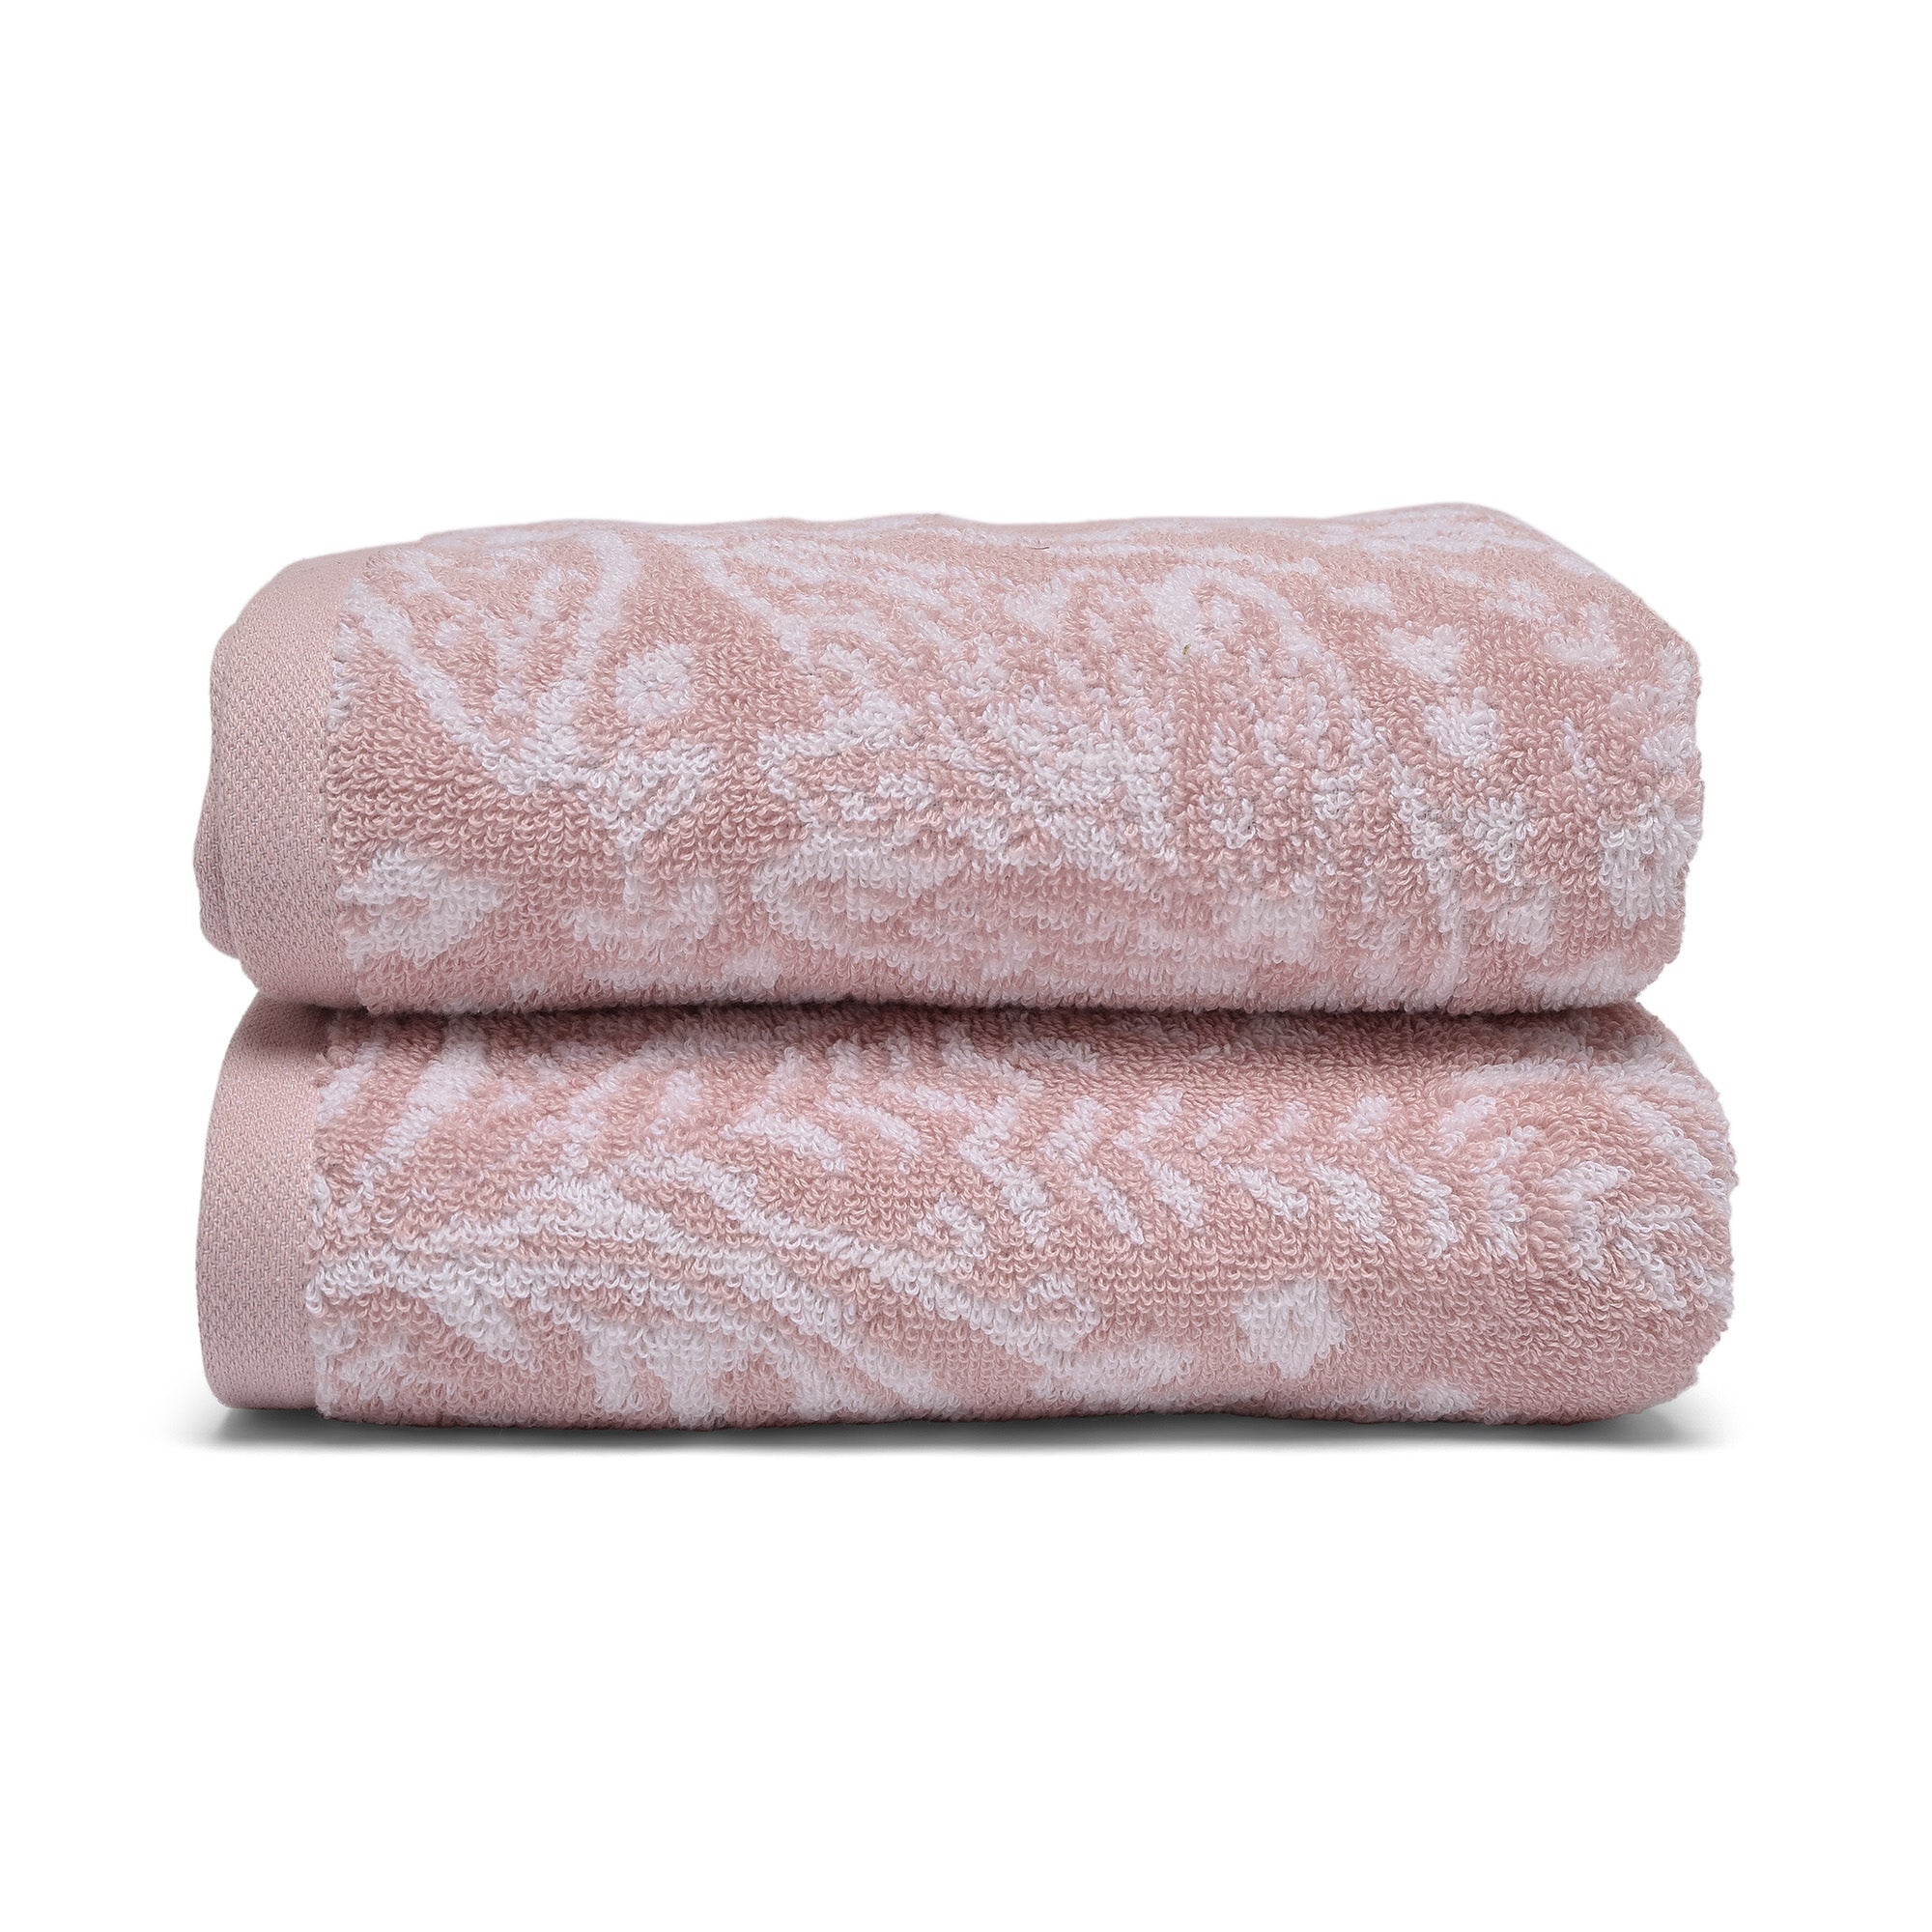 Hand Towel (2 pack) Aveline by D&D Bathroom in Soft Pink